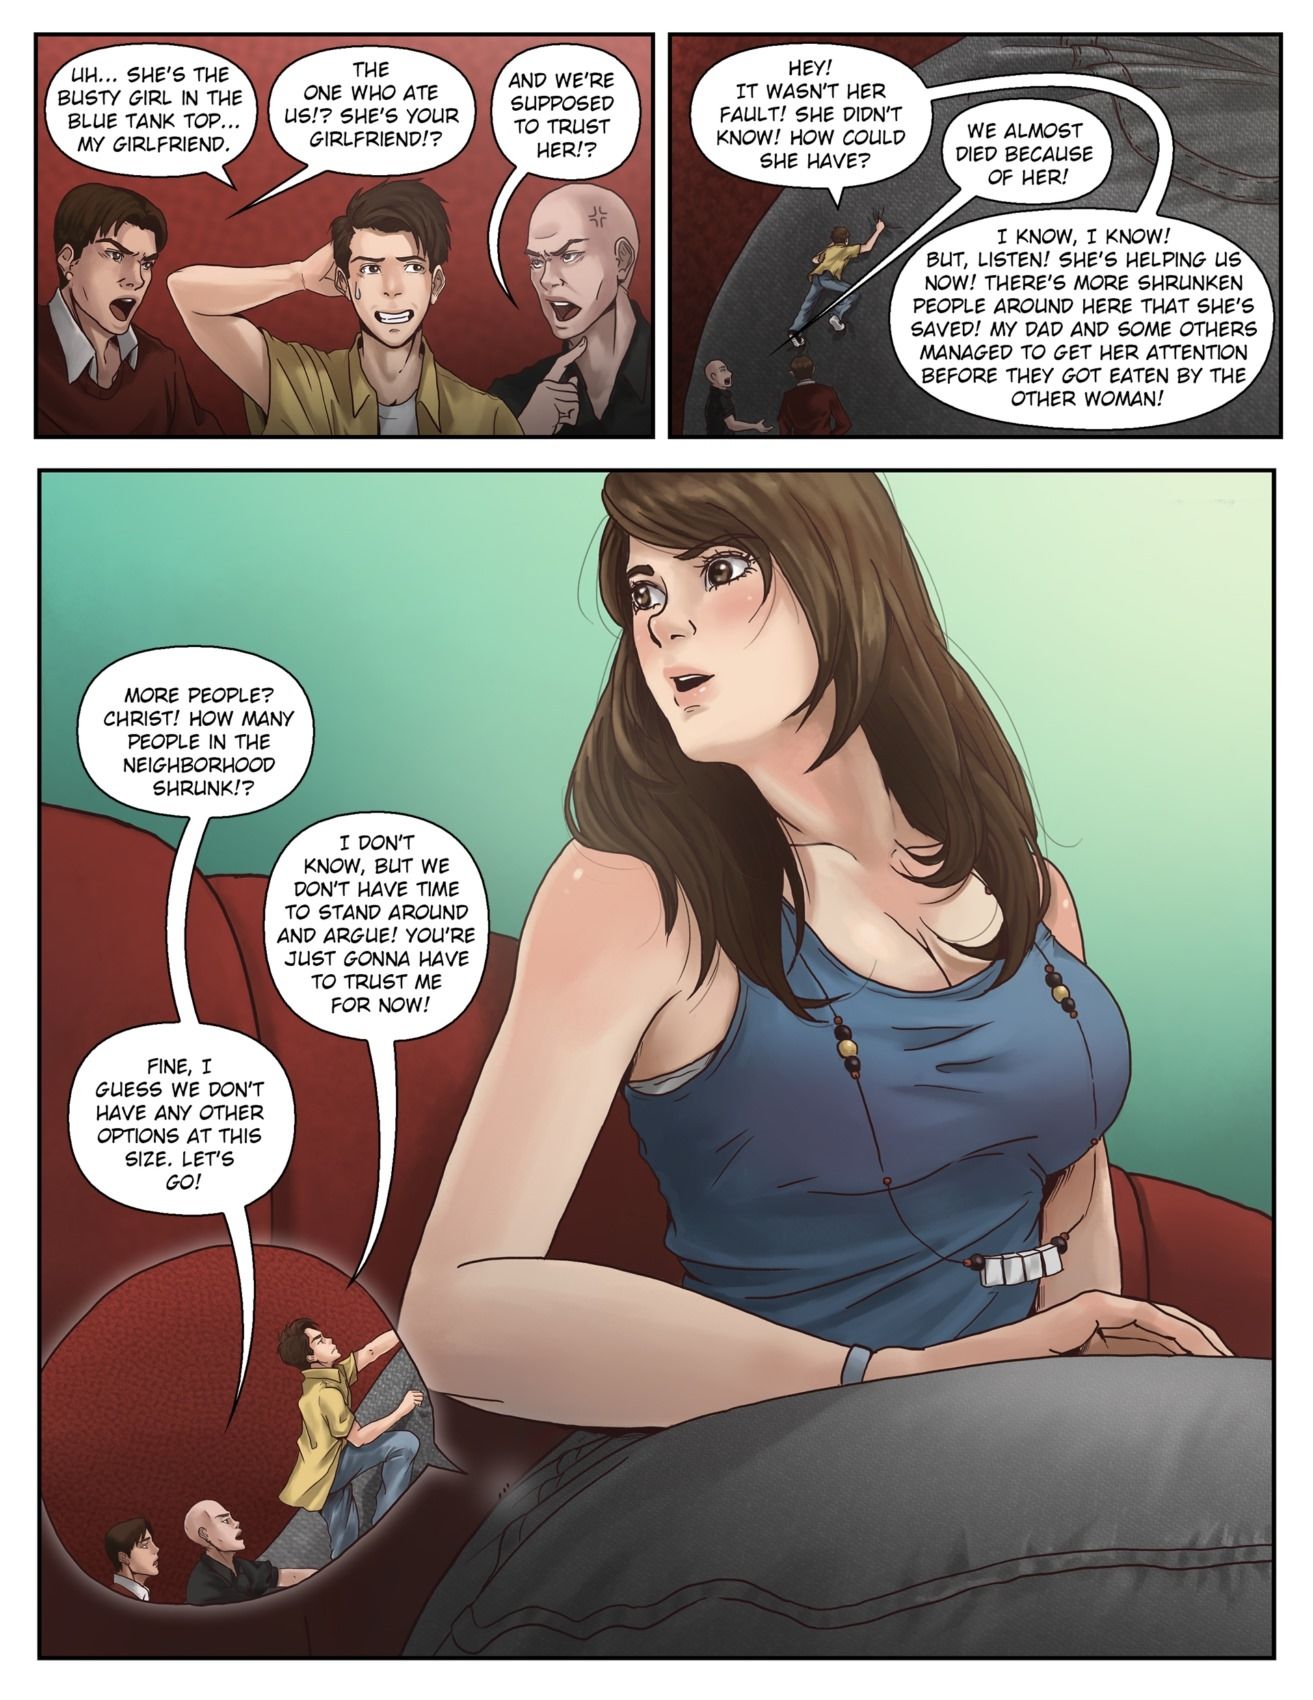 A Weekend Alone Issue 09 by GiantessFan page 15